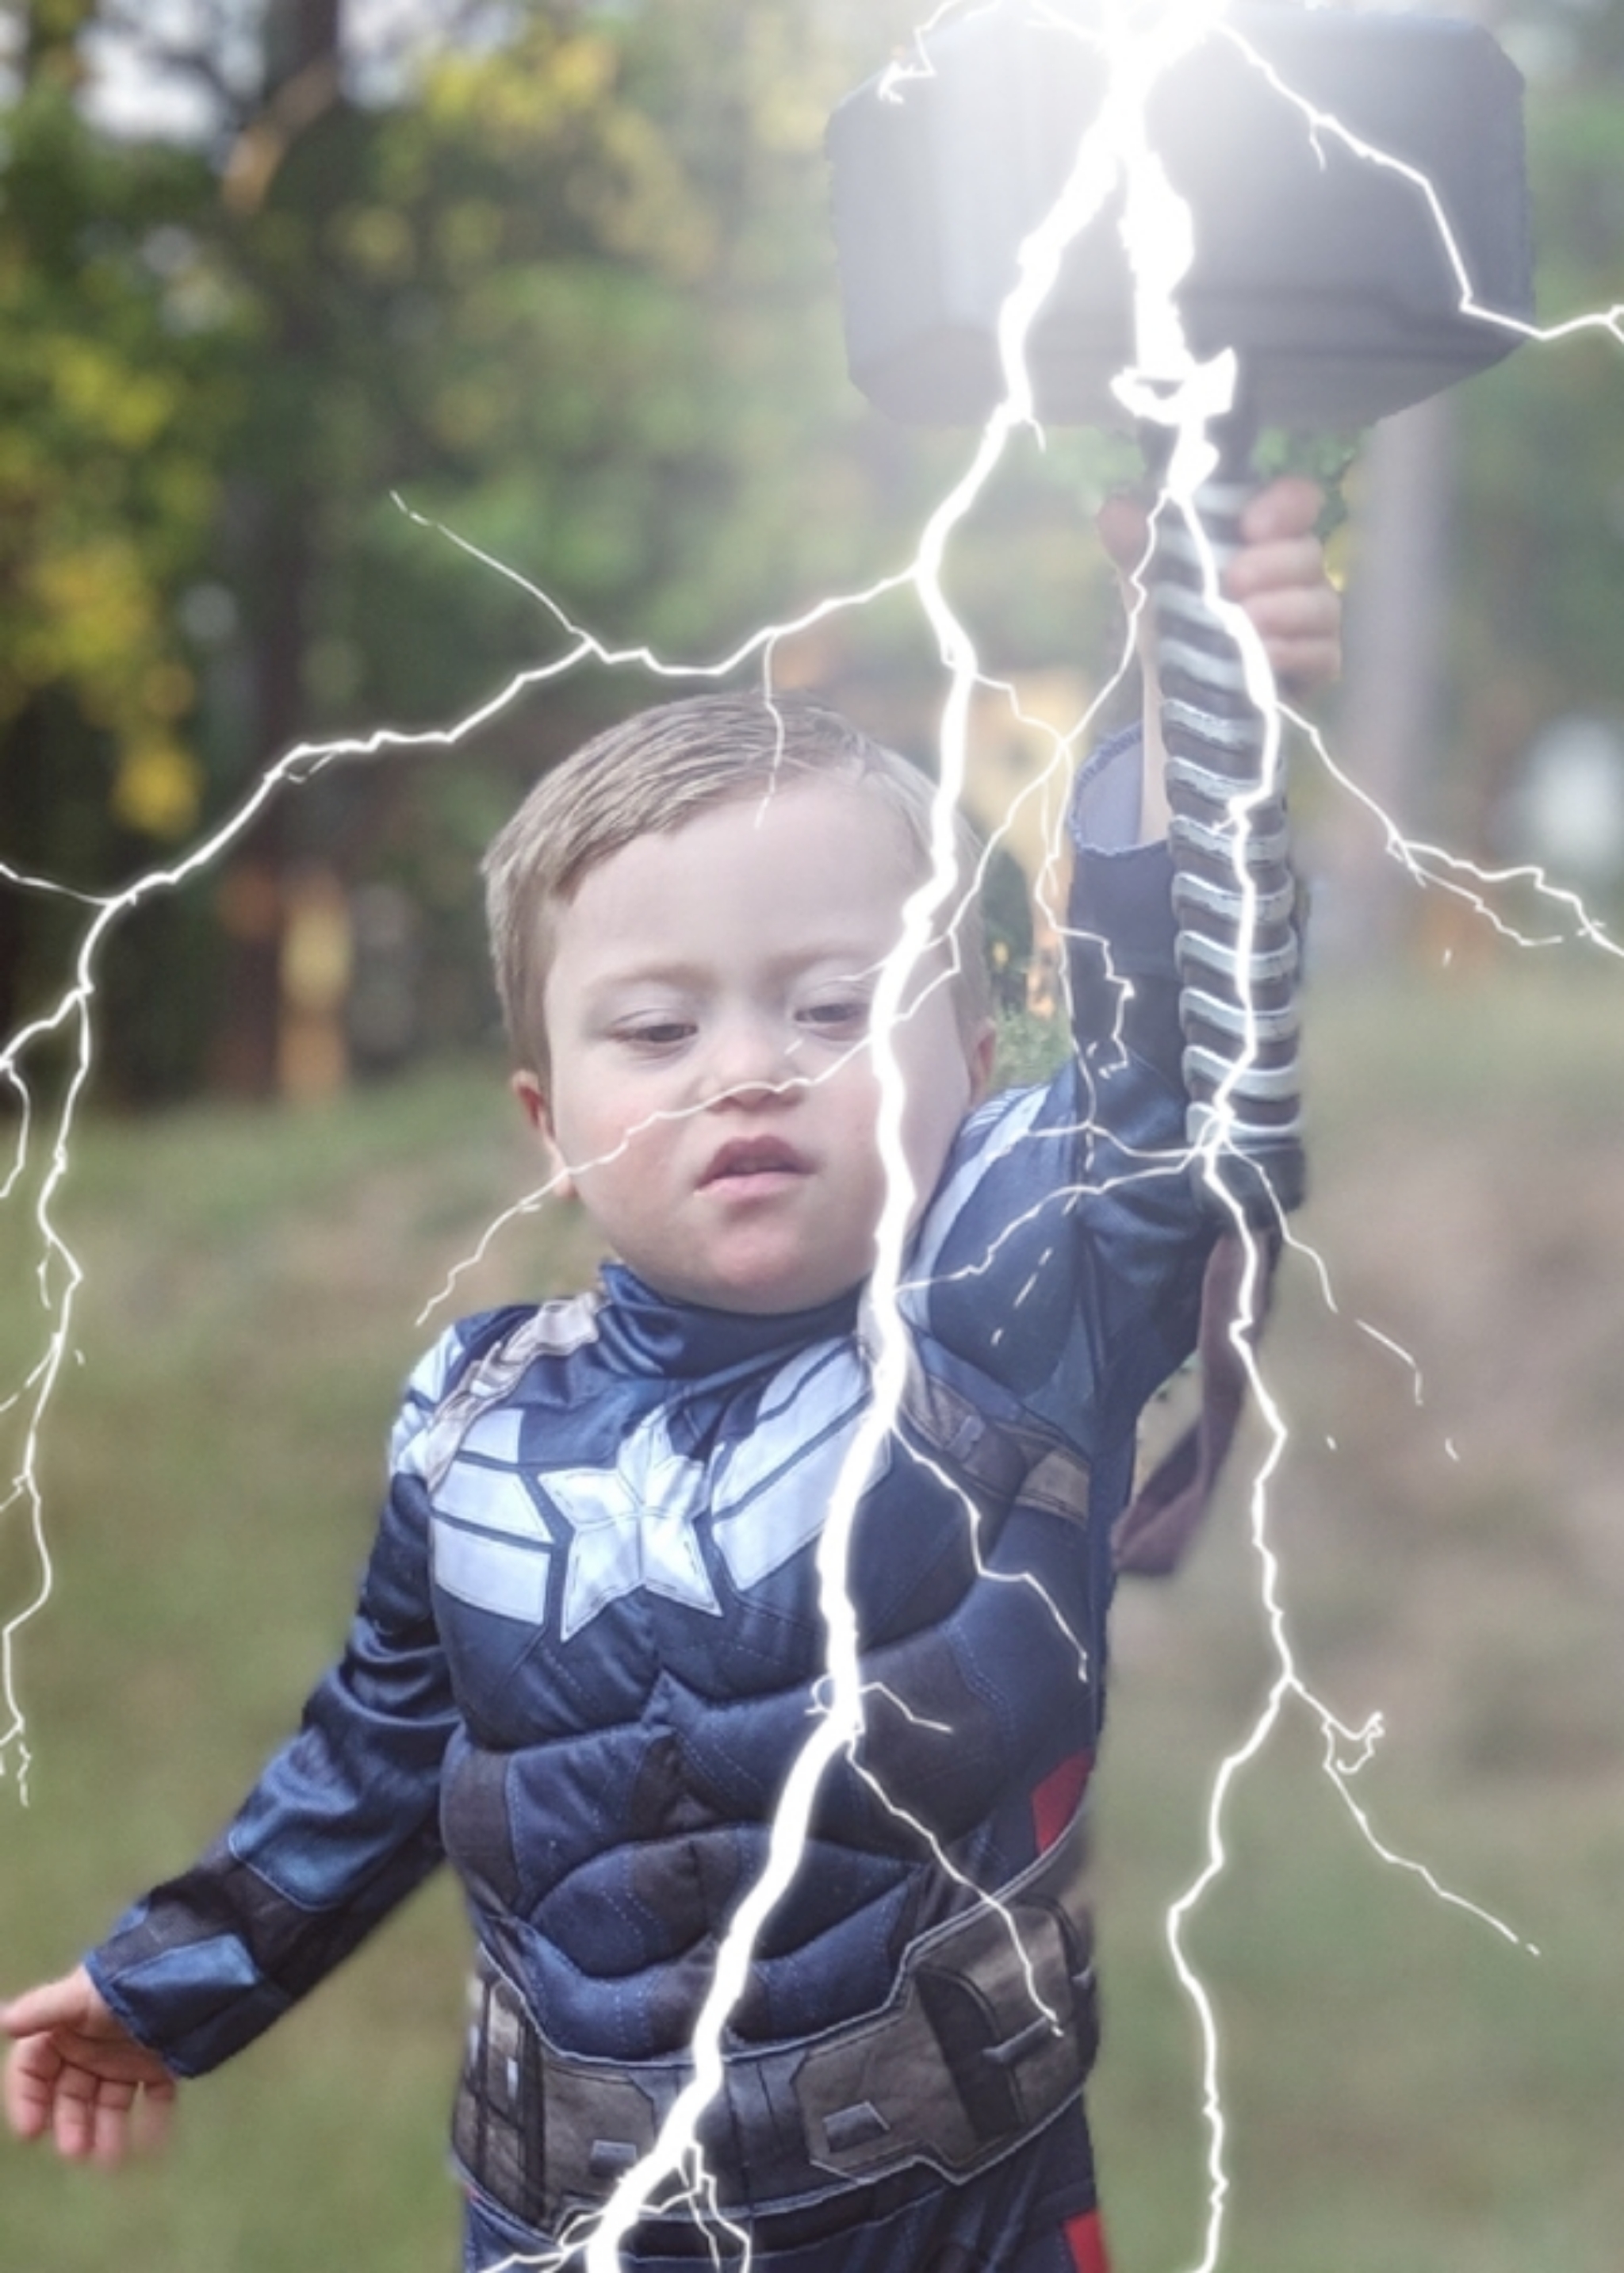 Adam's son dressed as Captain America holding Thor's hammer with lightning bolt effect..